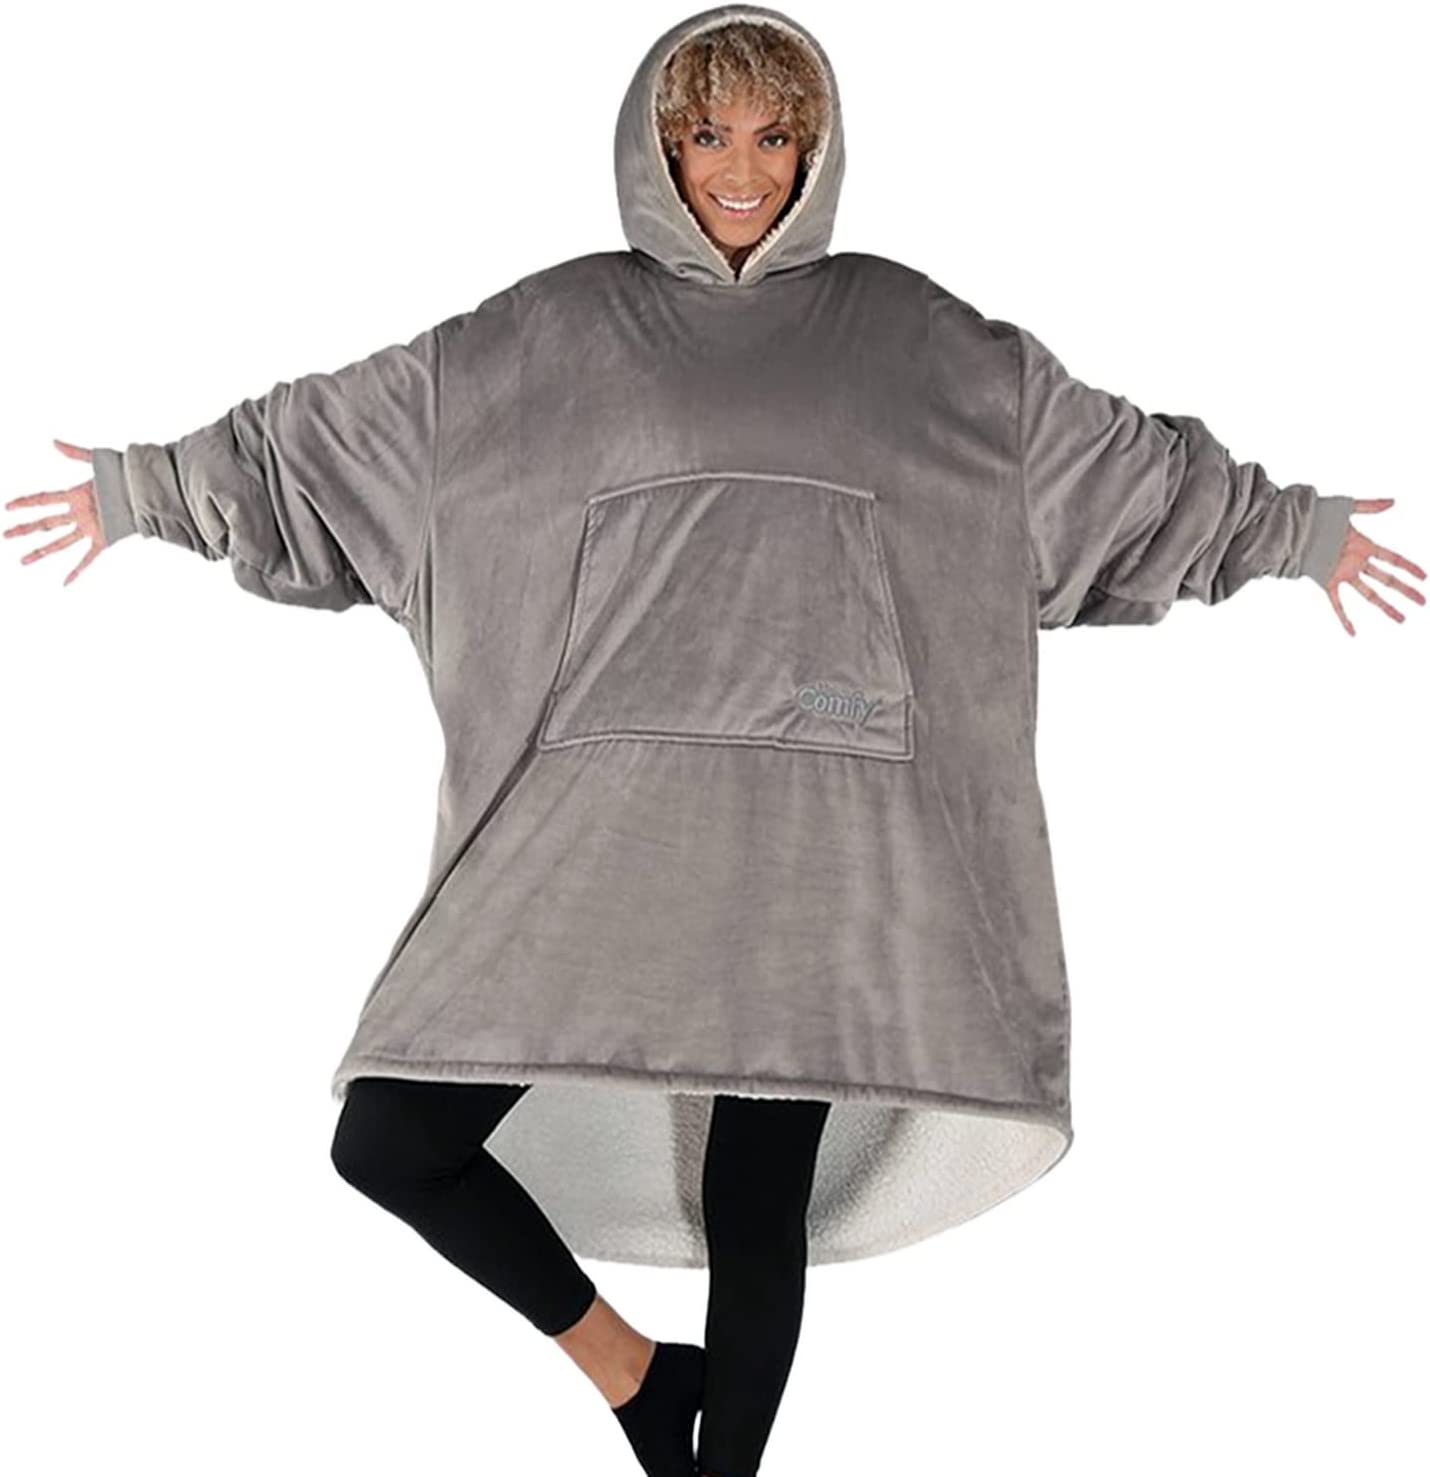 The Comfy Original Oversized Microfiber Wearable Blanket for Adults, Grey - image 1 of 5